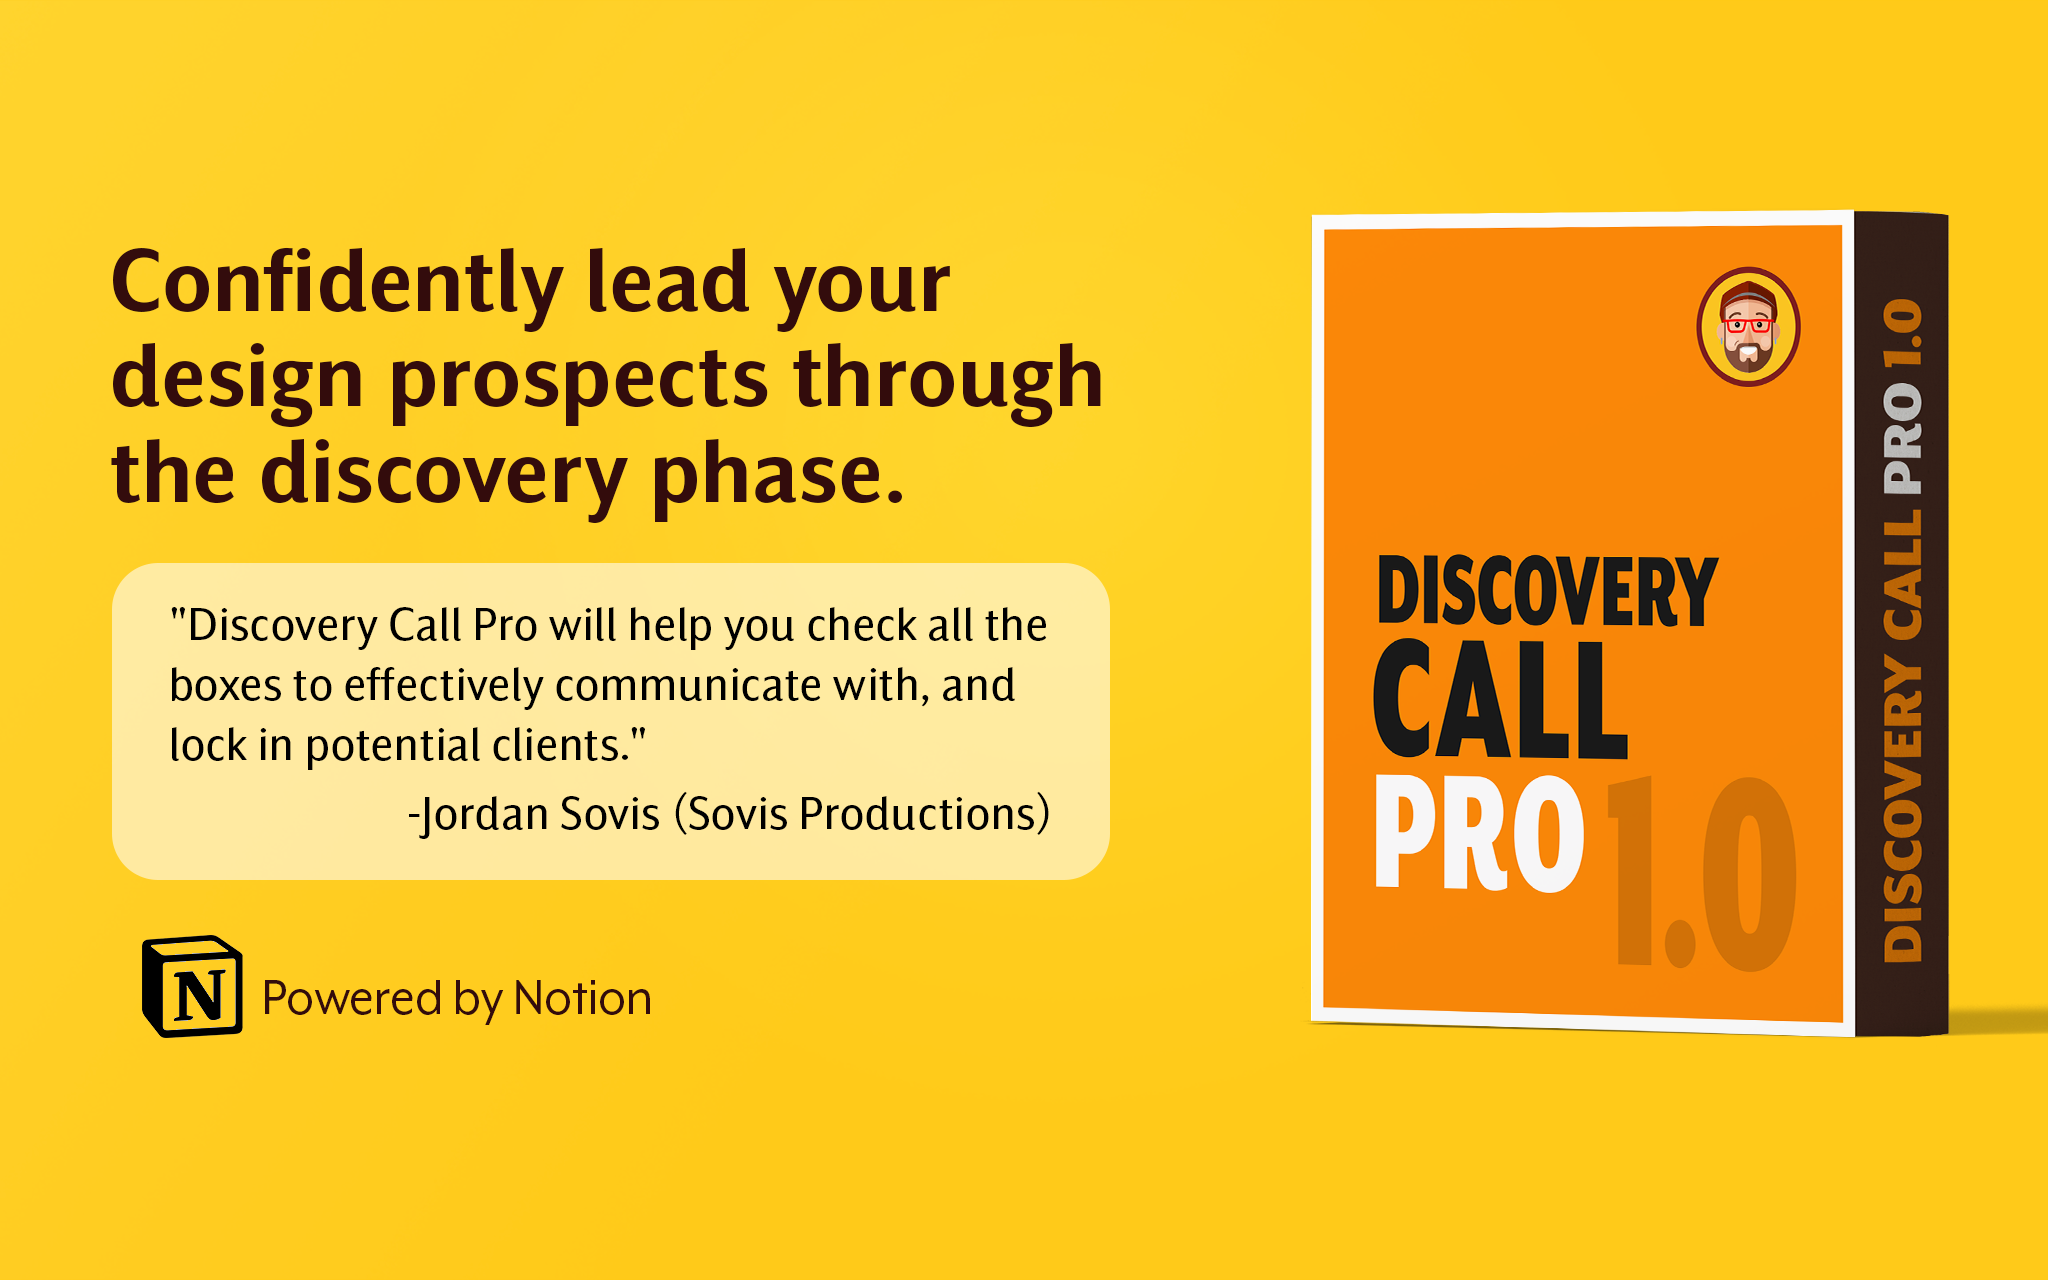 A word-for-word script with over 40 questions to help you navigate discovery calls, clearly capture your prospect's vision, and win their trust.